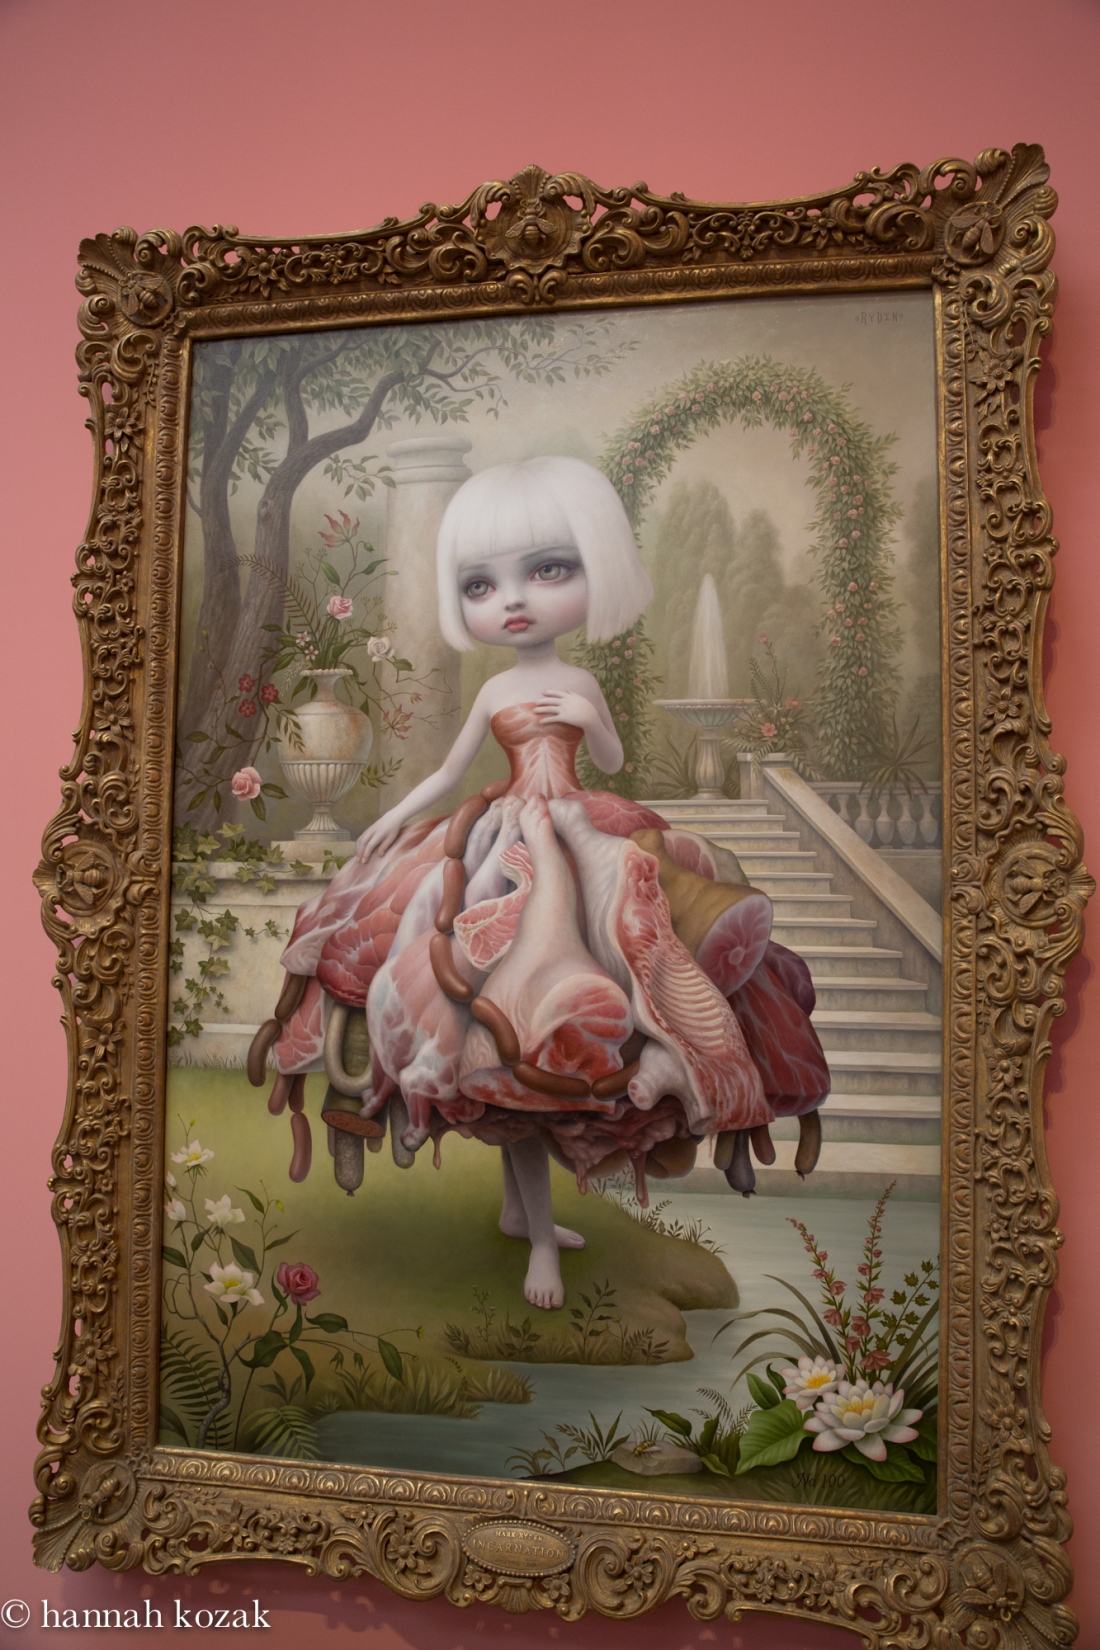 Mark Ryden, Incarnation, 2009, oil painted on canvas with artist designed frame, 86.5 x 63.5 inches